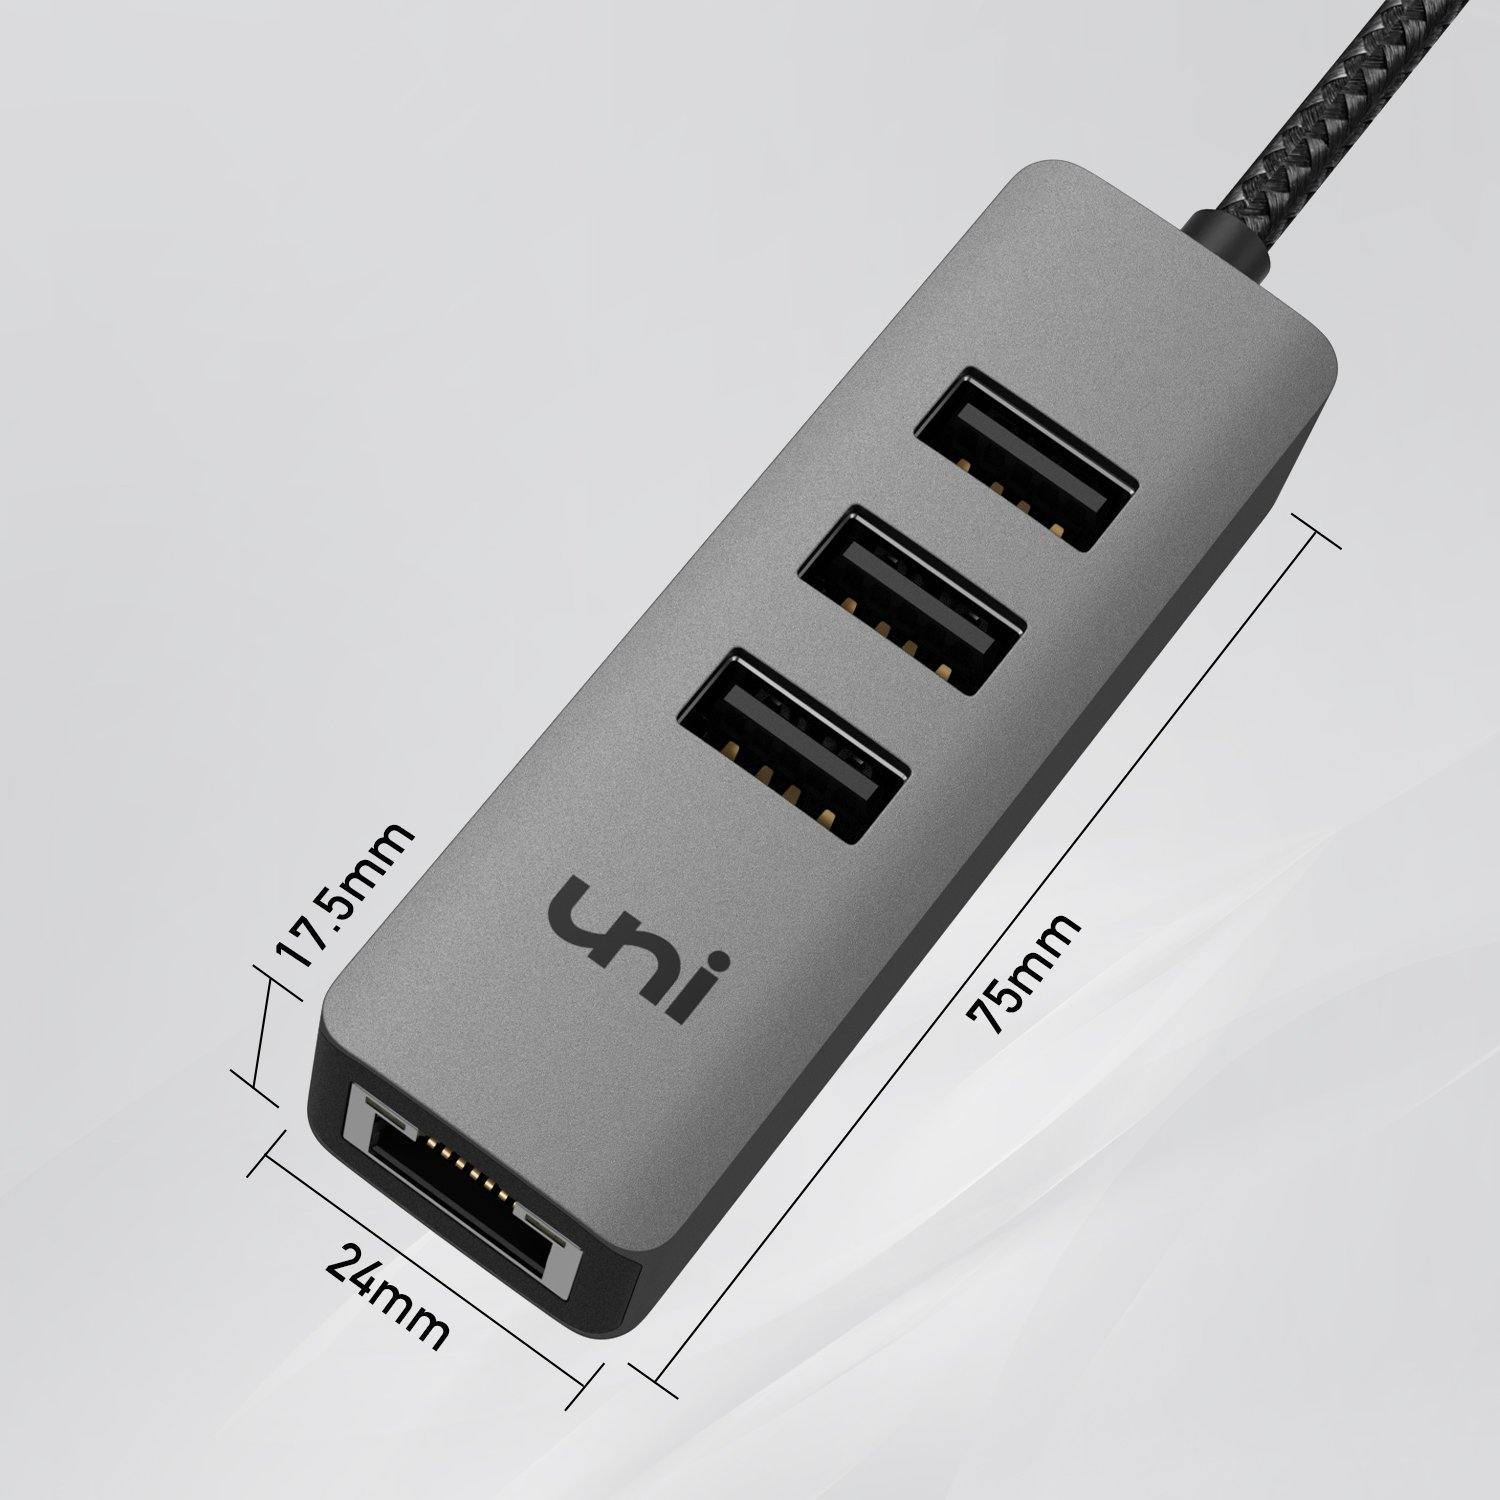 133481 USB-C to 3-port USB 3.0 Hubs with Gigabit adapter - Equip